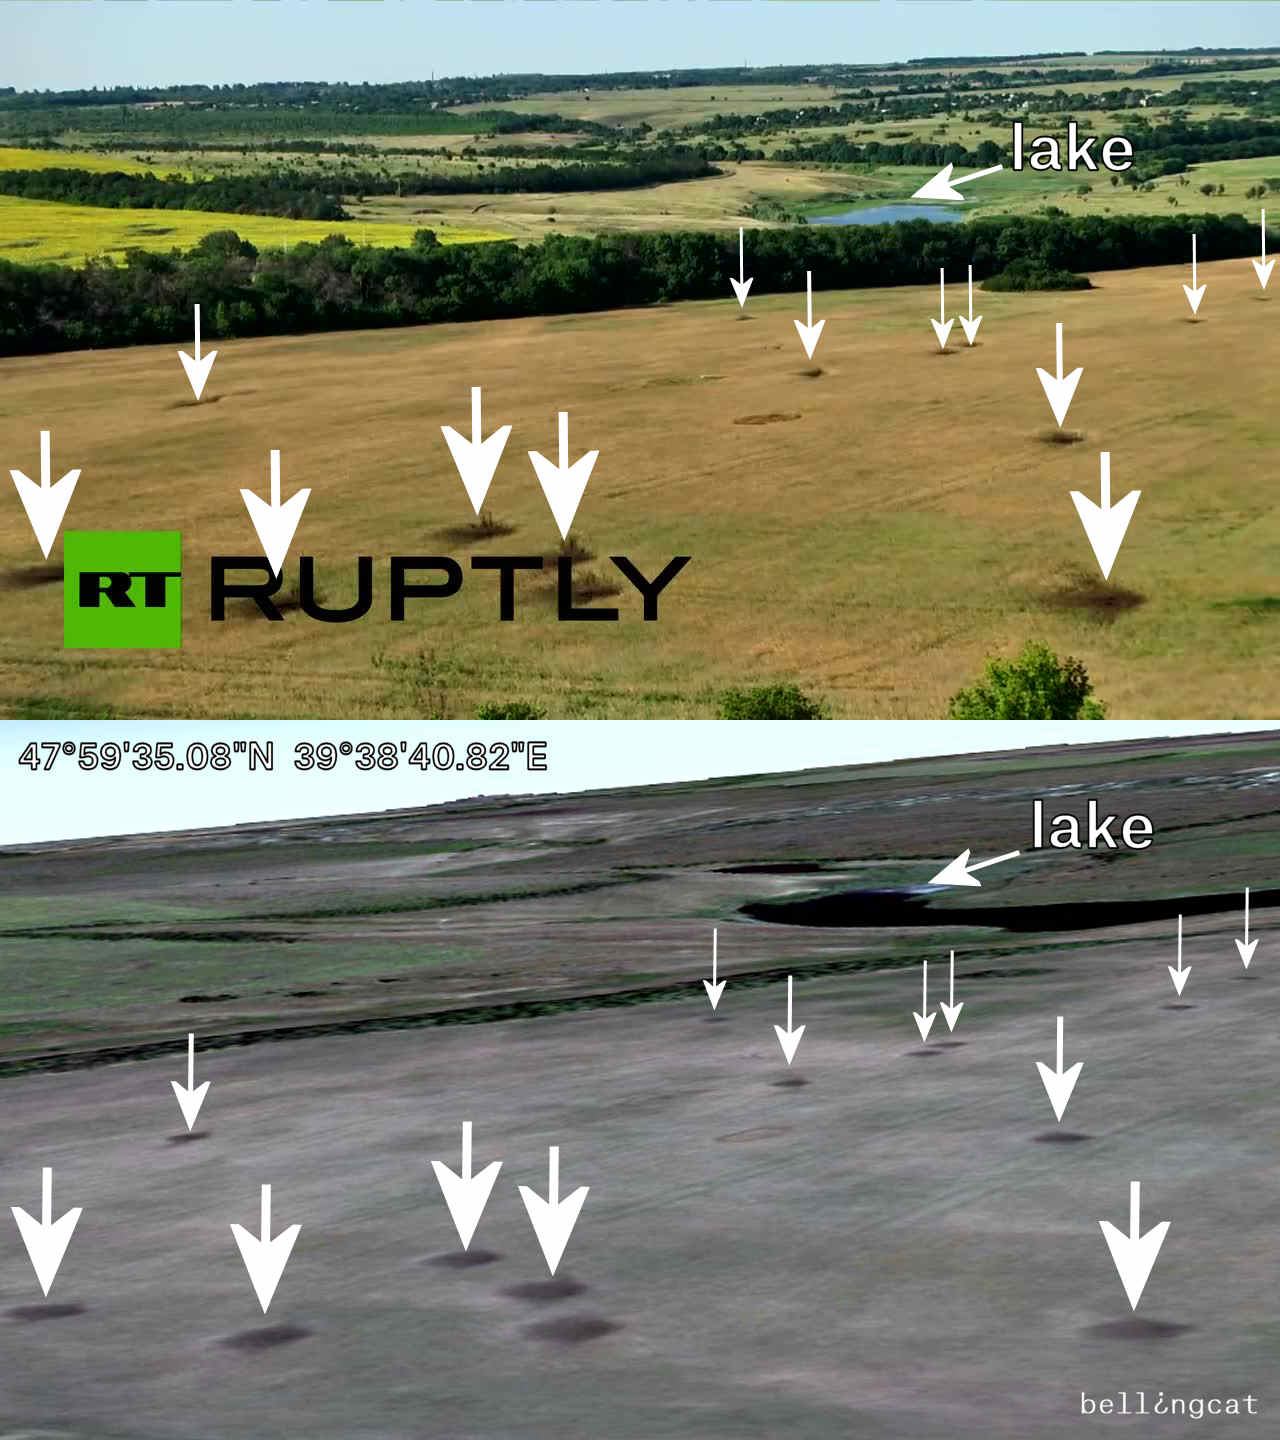 Comparison shot from Ruptly video and the 15 August 2014 satellite image from Google Earth